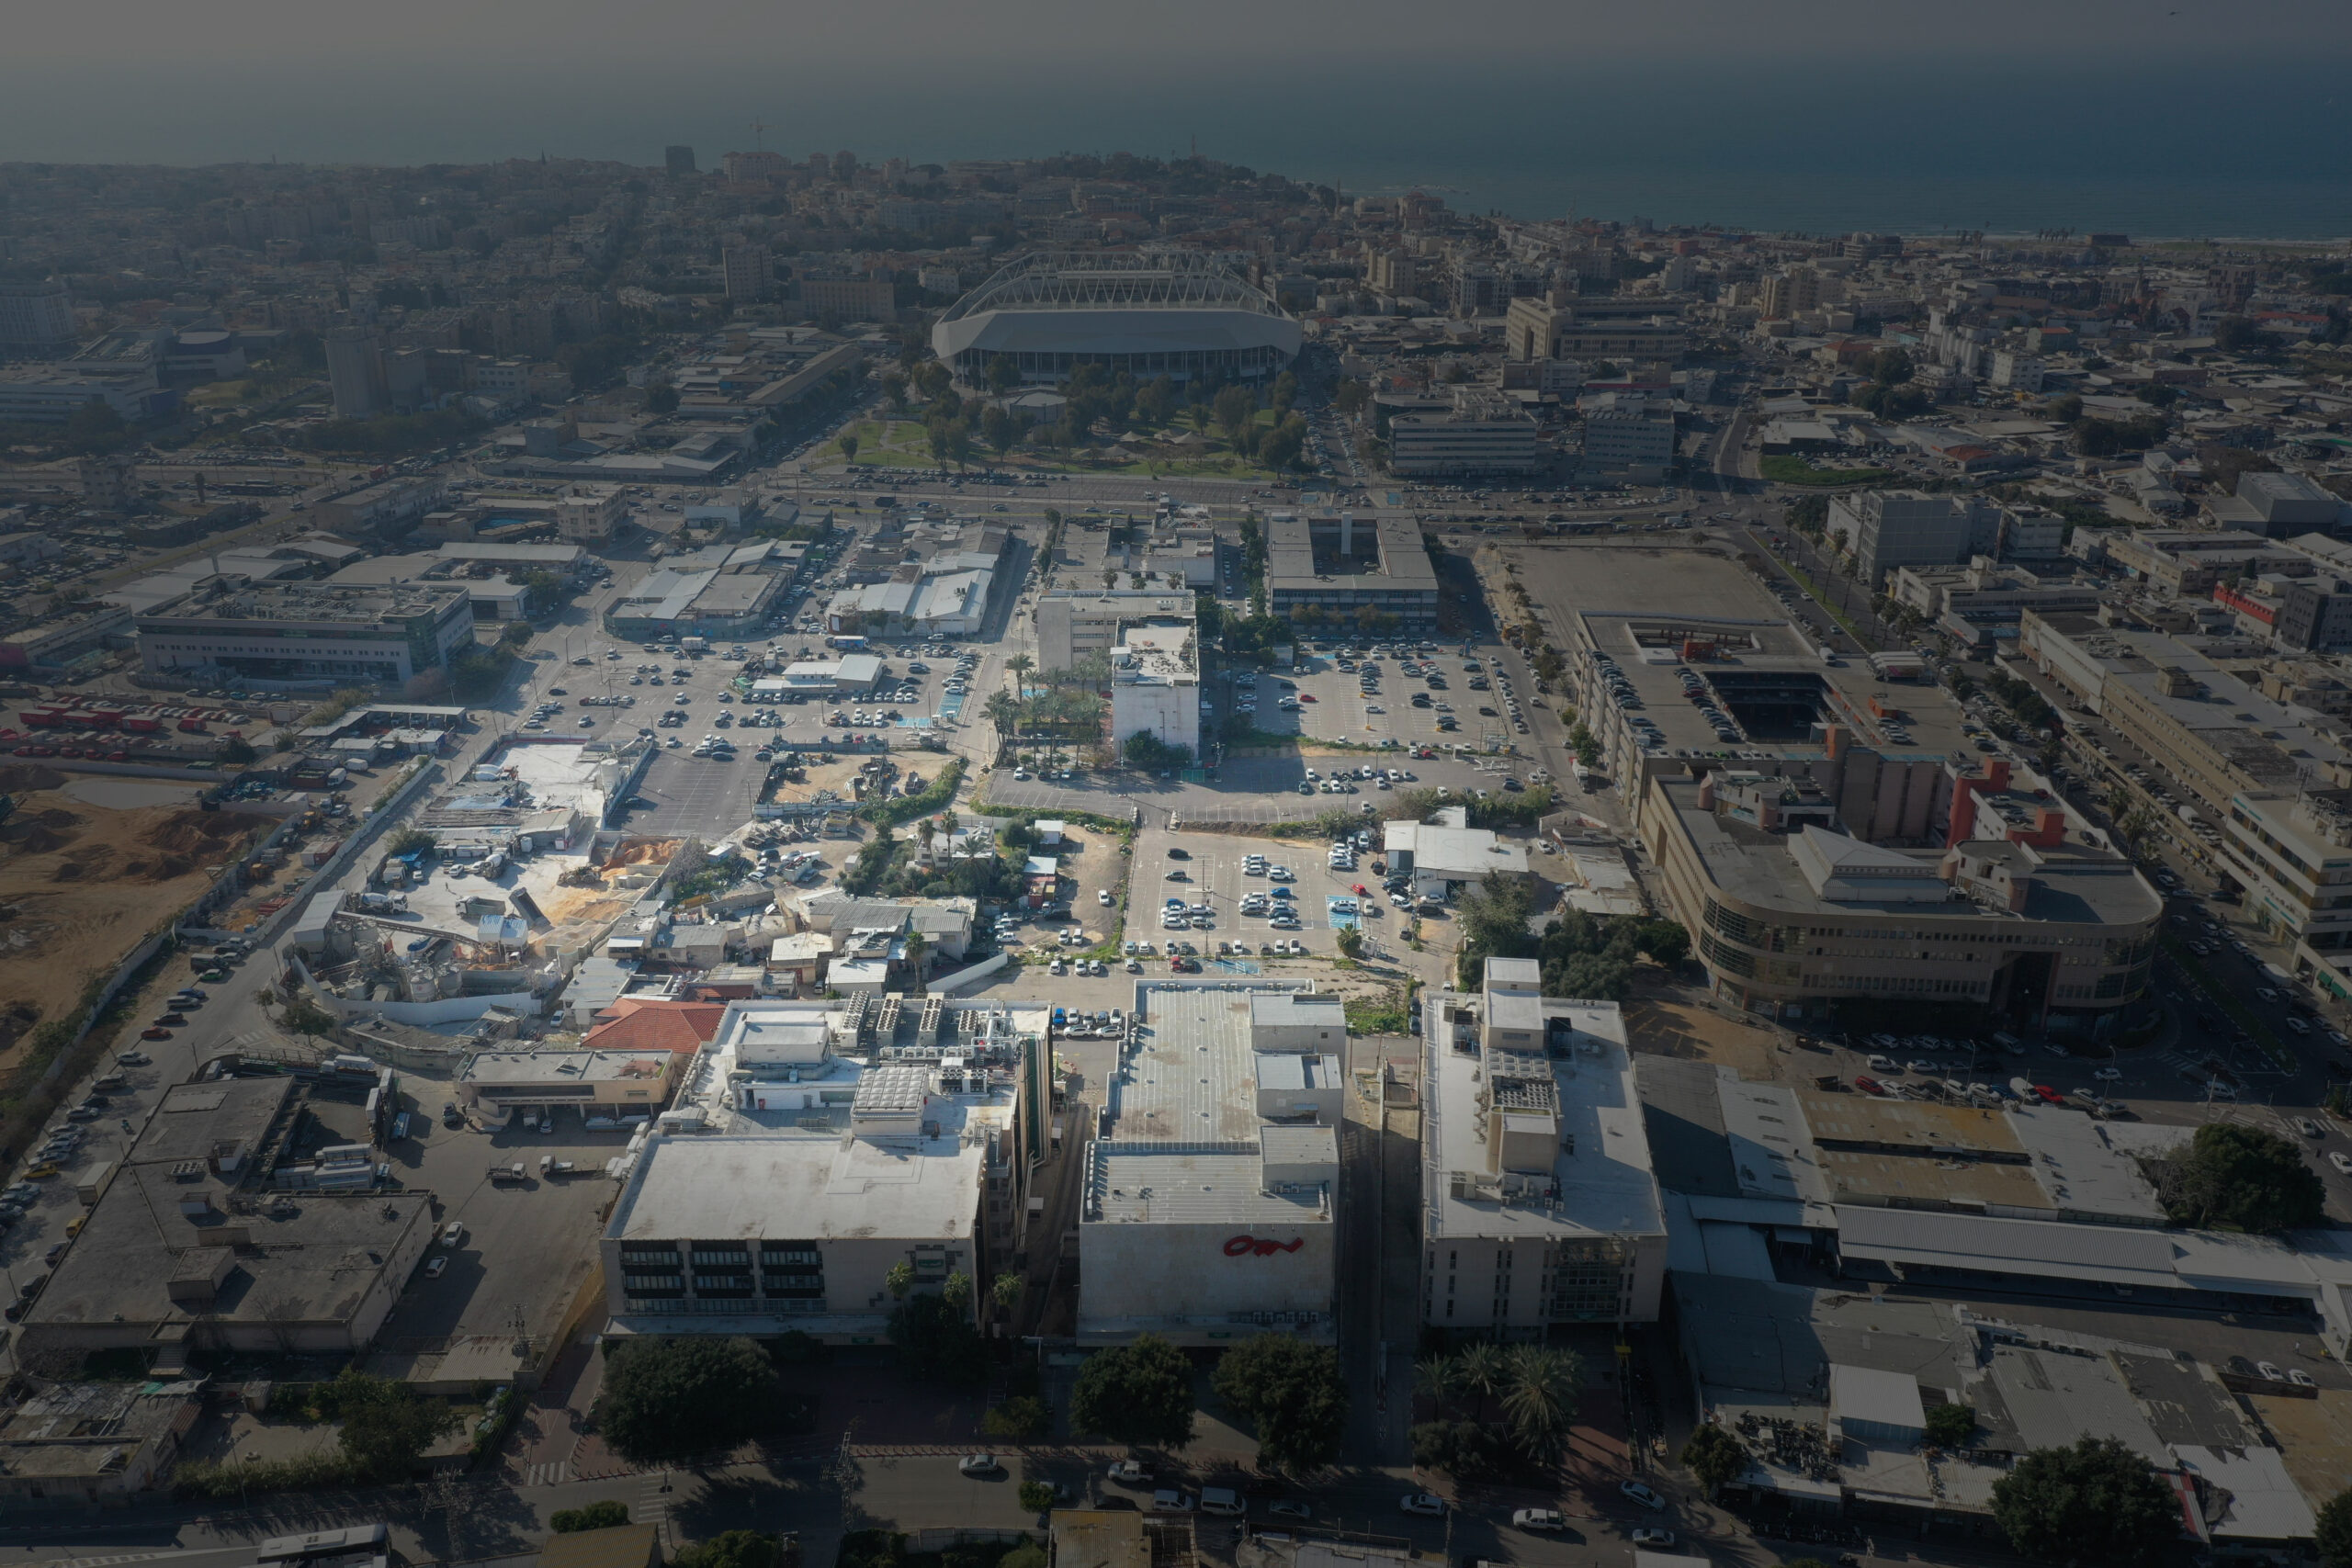 Snir Orchard: A value-add project transforming the compound into a mixed-use quarter in accordance with TA/5000 Master Plan | Reality the Leading Group of Real Estate Investment Funds in Israel